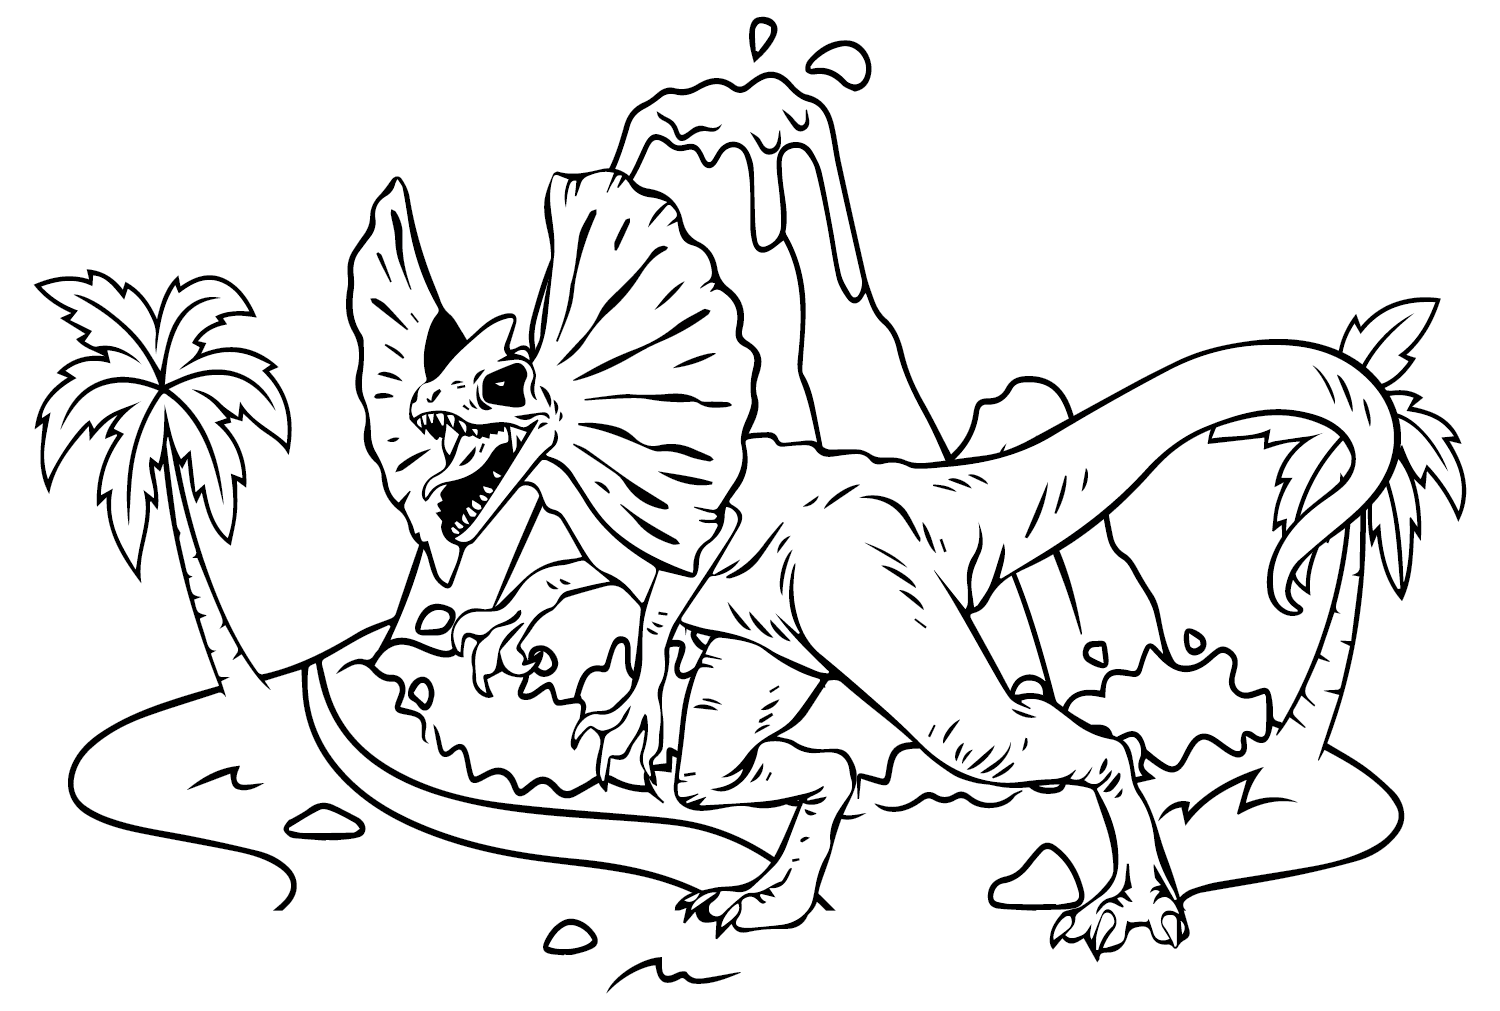 Dilophosaurus Coloring Pages to Printable from Dilophosaurus